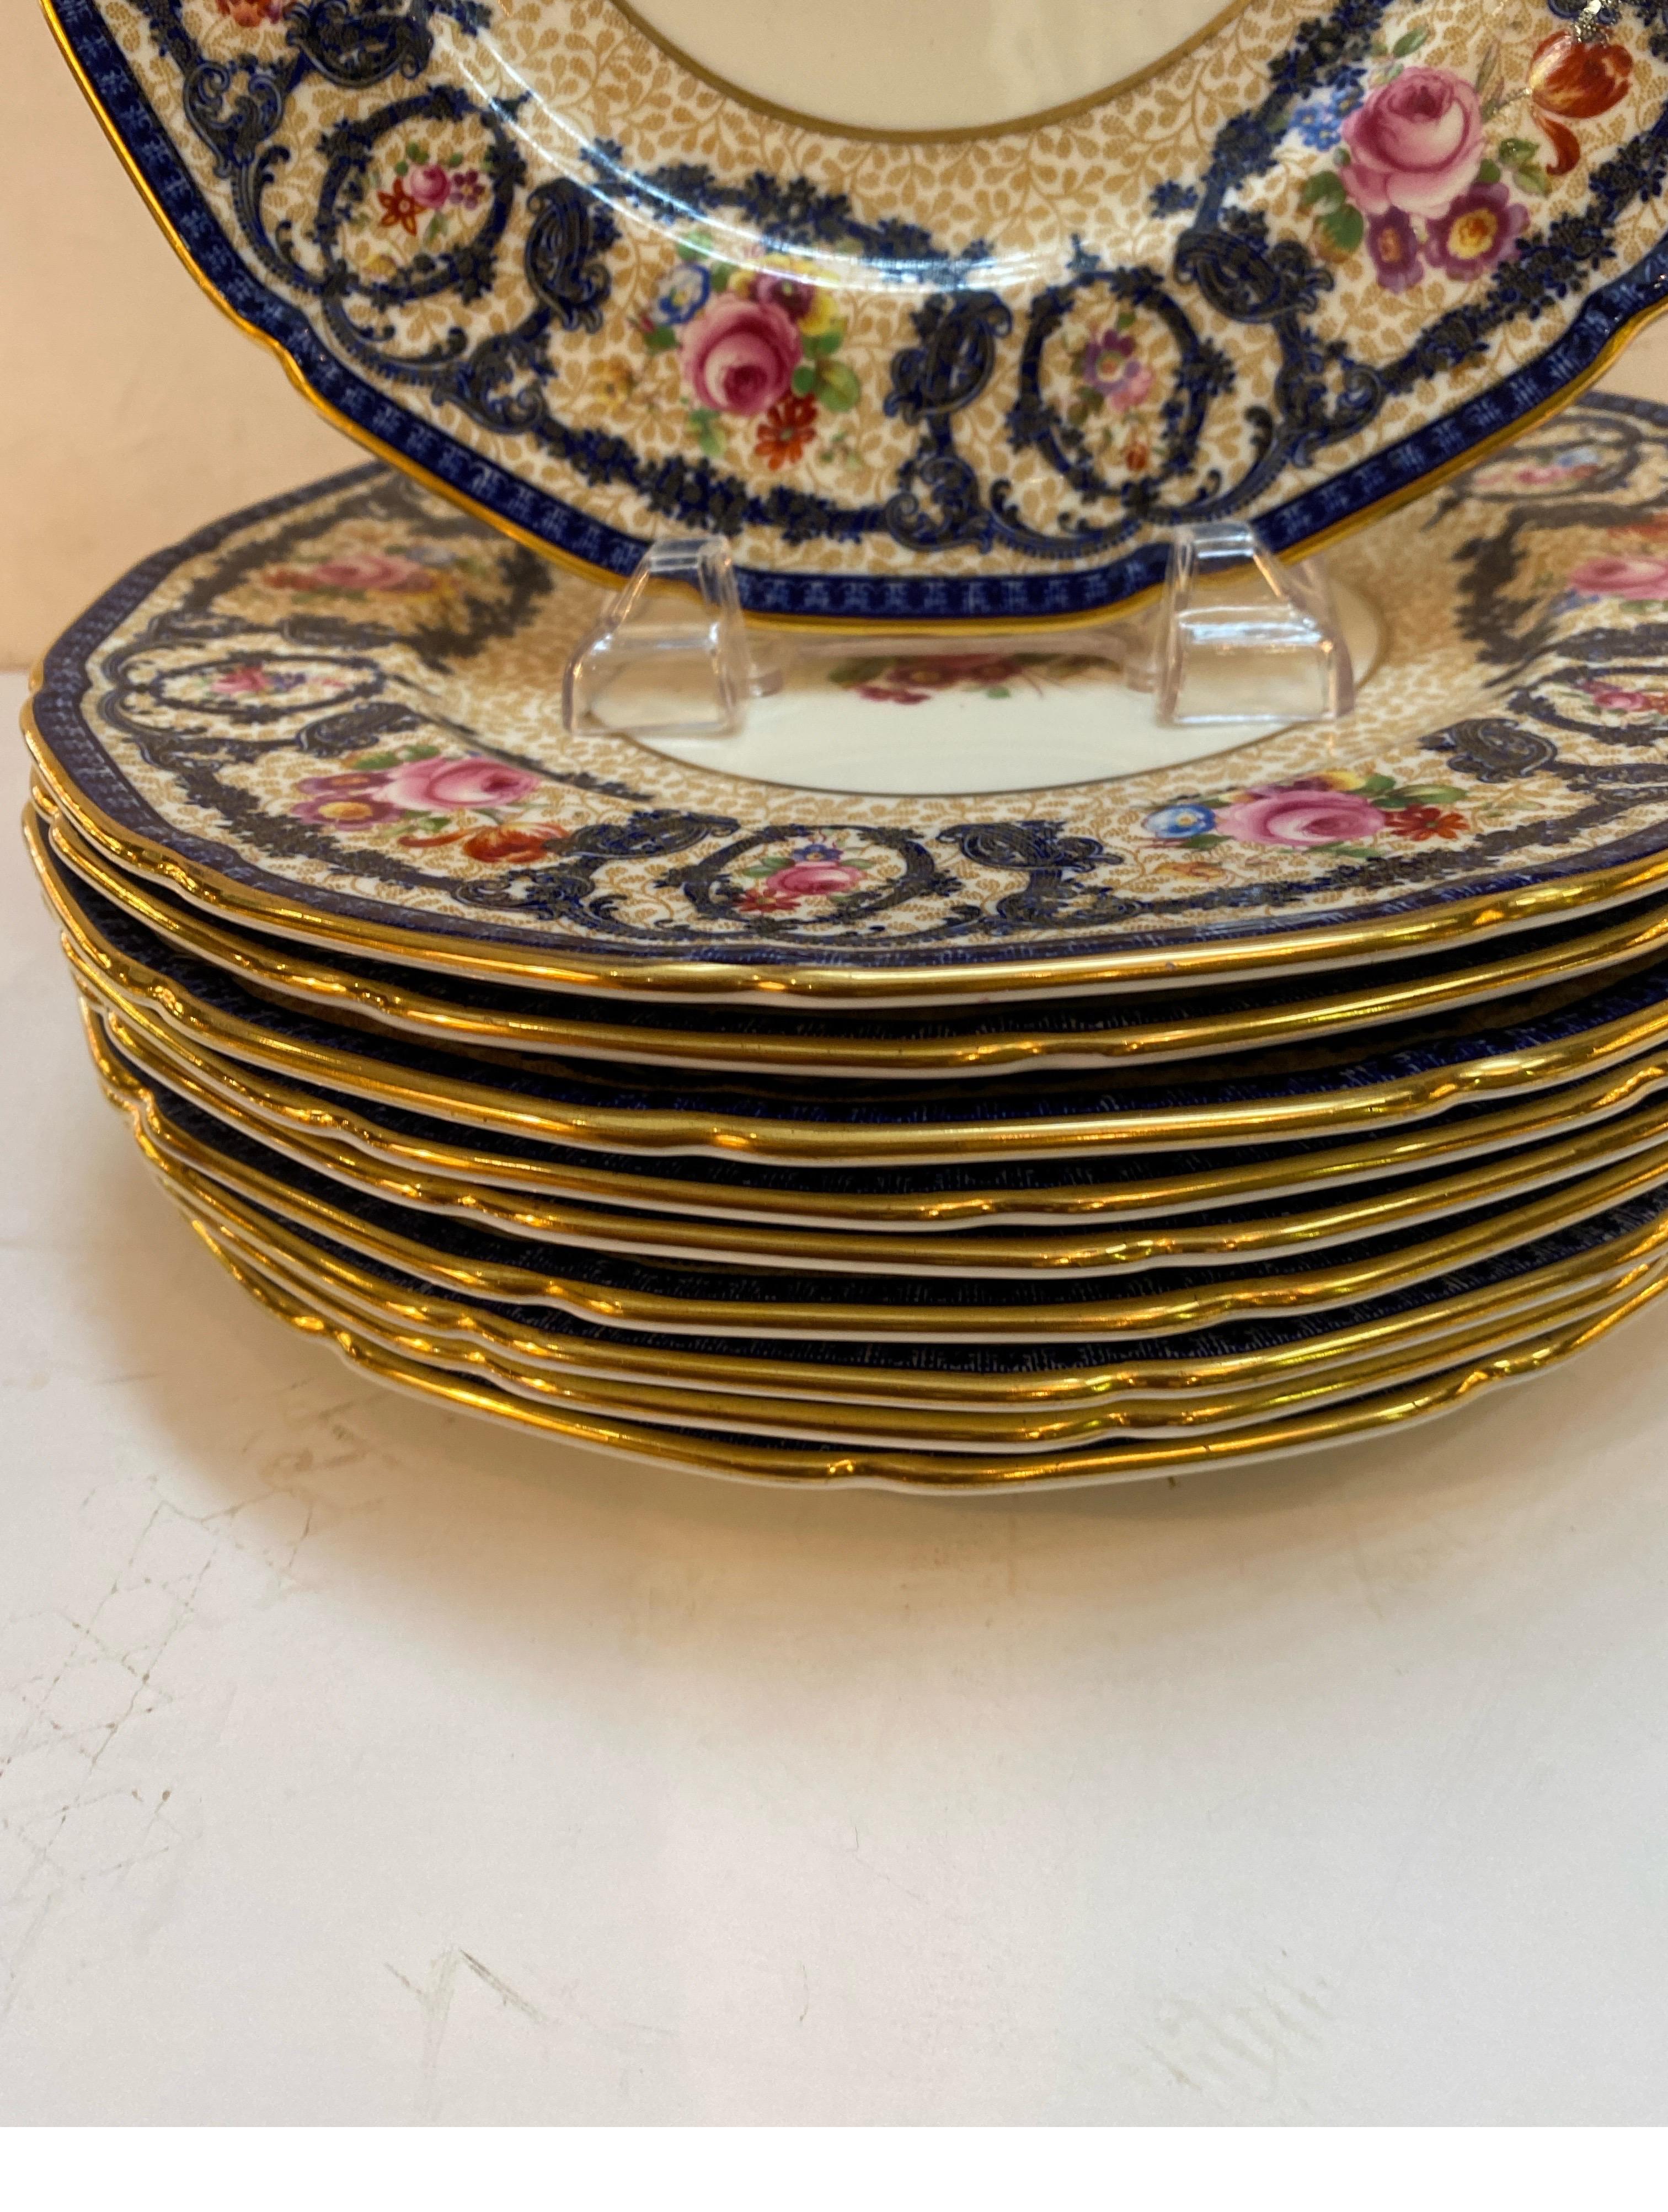 English A Set of 10 Hand Painted Antique Service Plates by Royal Doulton Circa 1915 For Sale